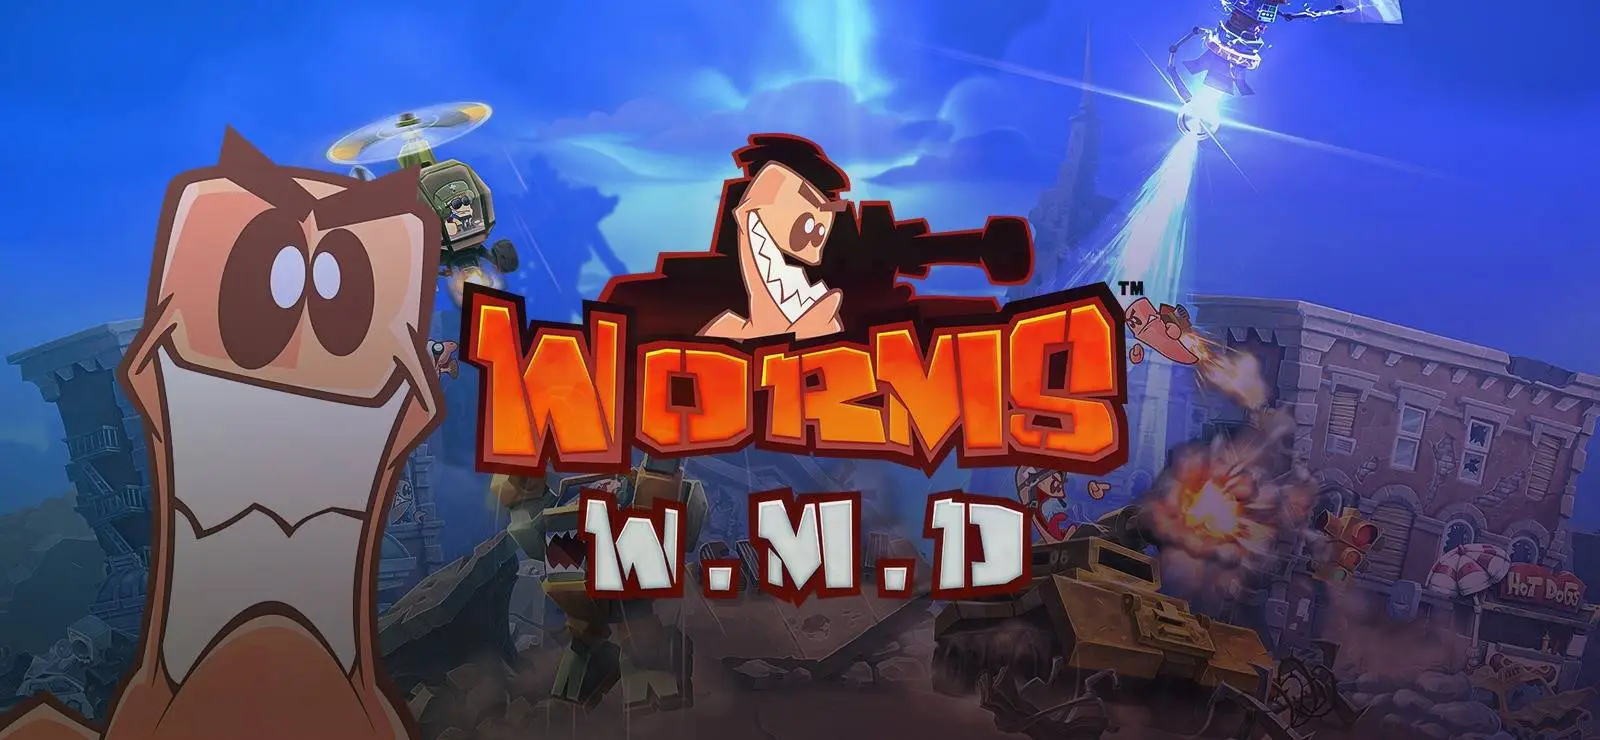 Worms W M D (2016)